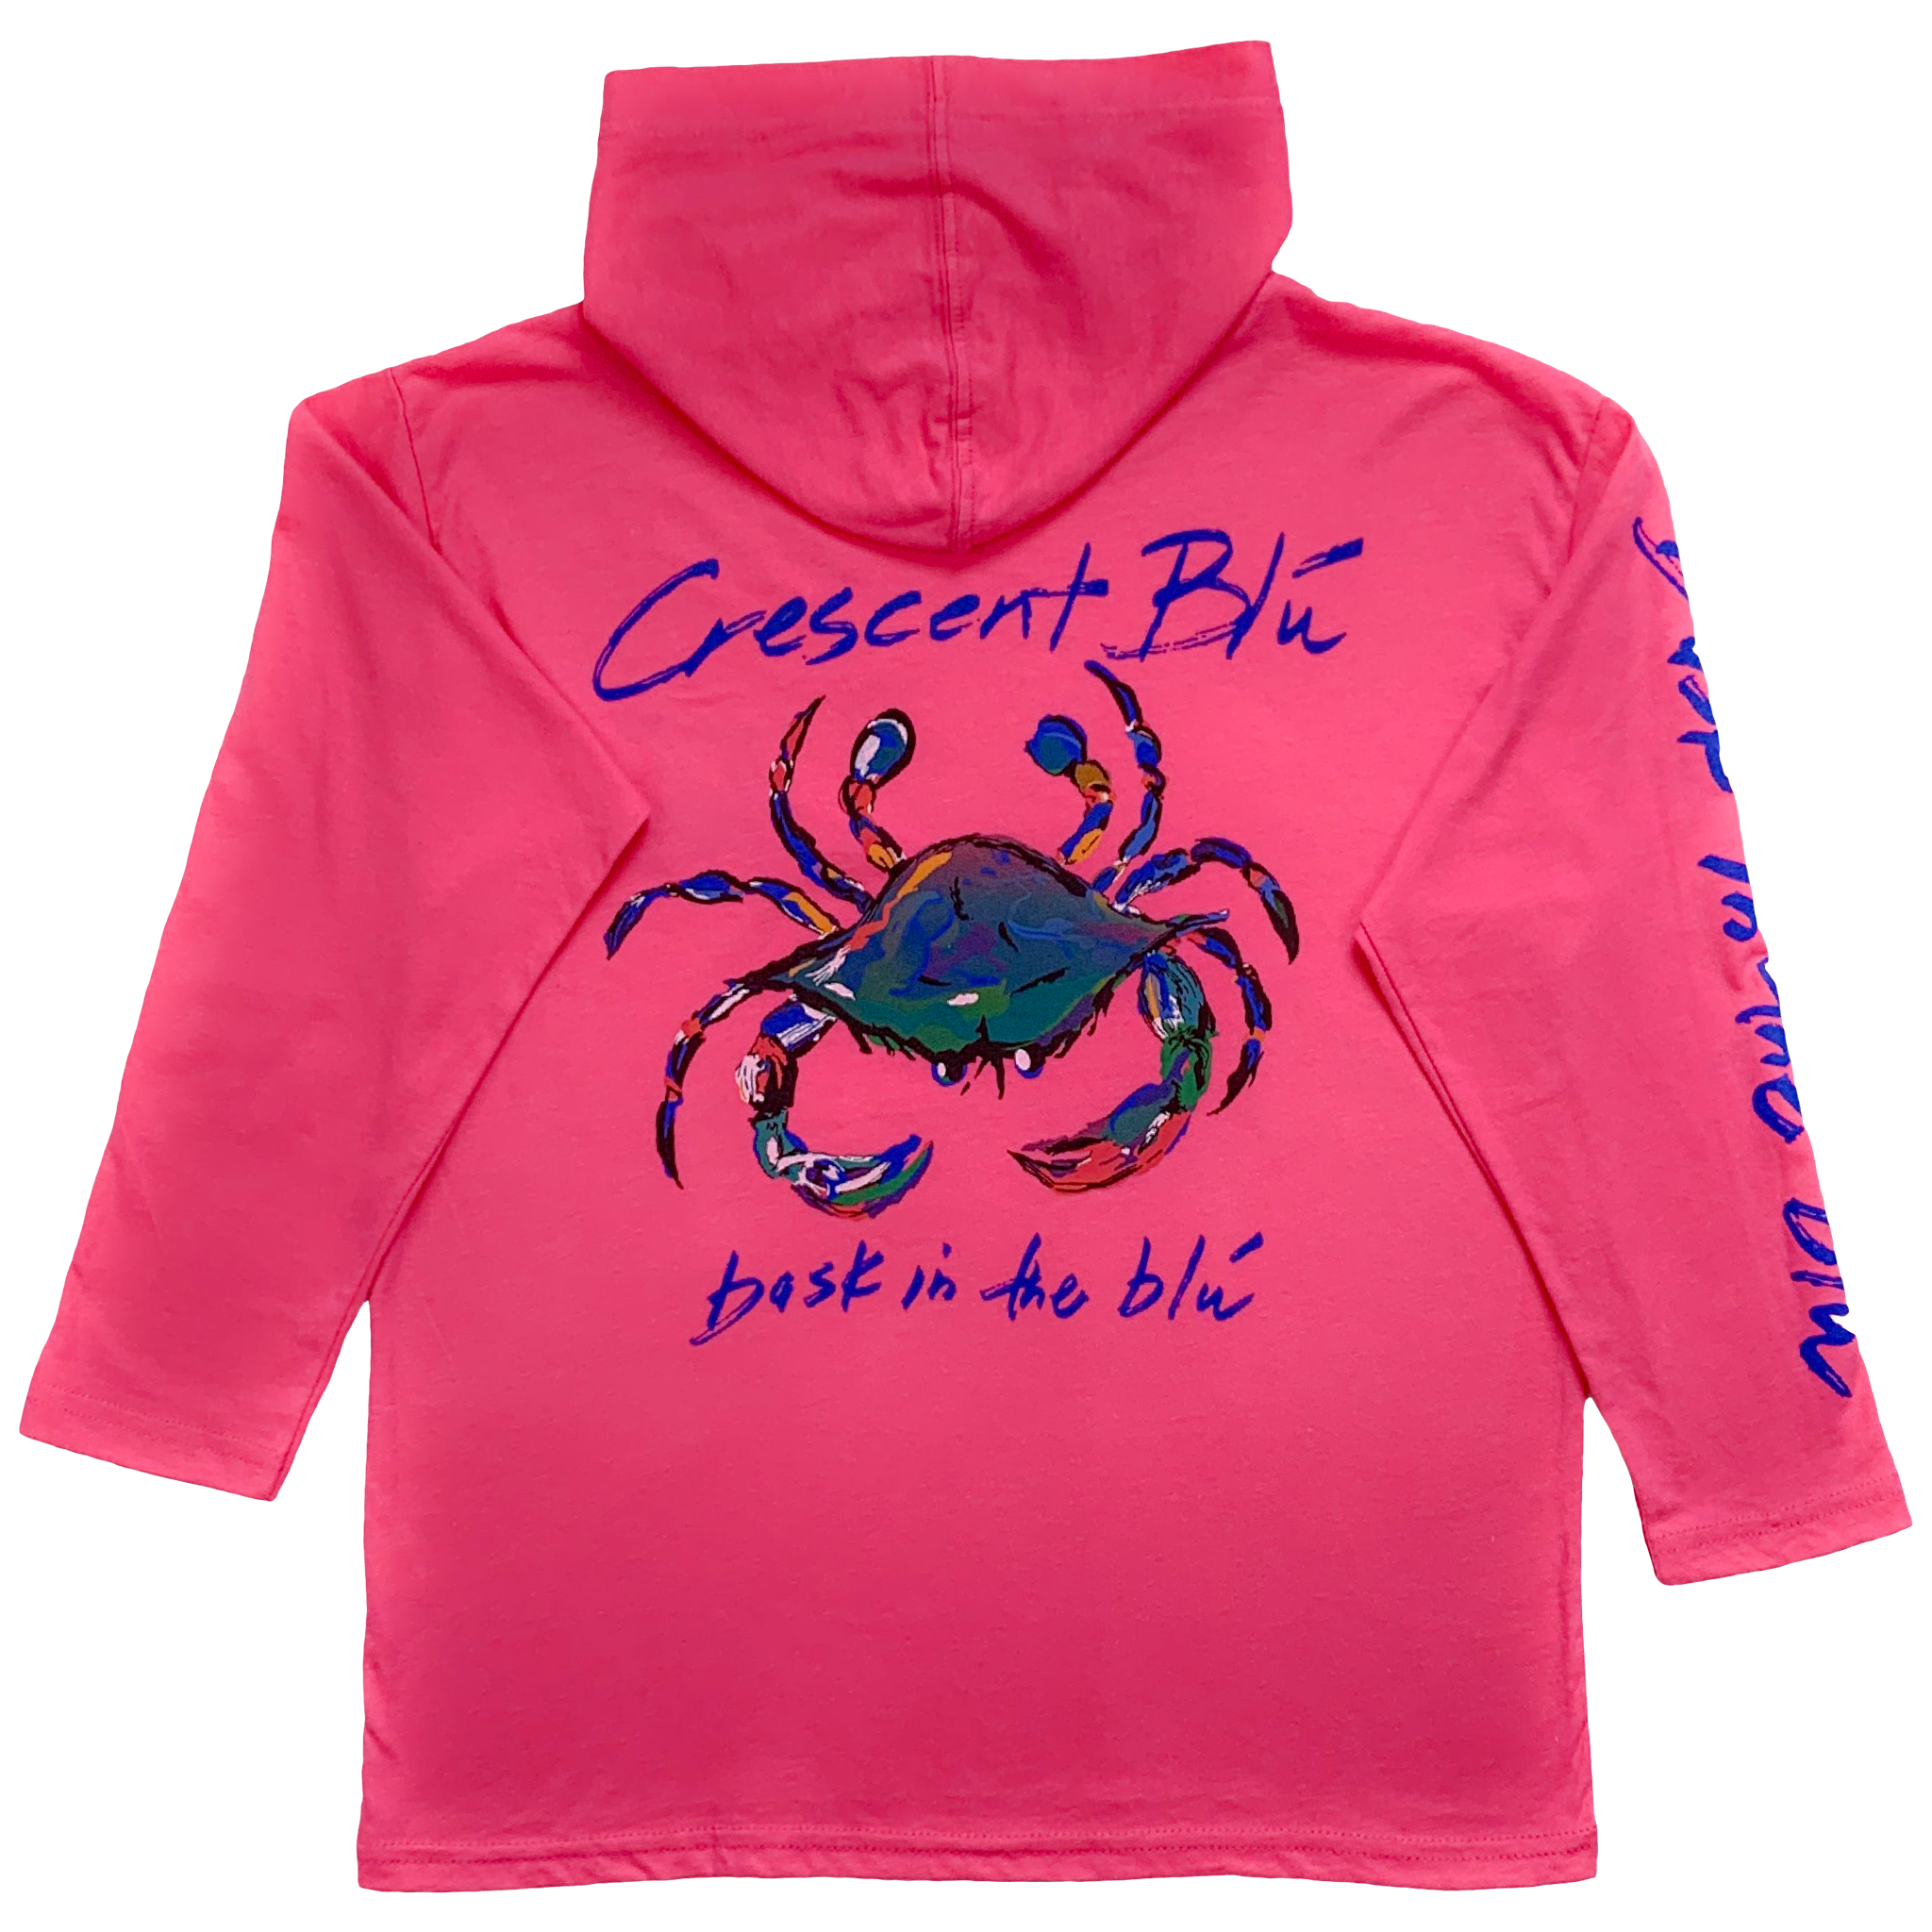 View of back of Youth Hoodie T-shirt in Hot Pink color with large multi-colored crab logo and Bask in the Blu tagline printed on the back. 